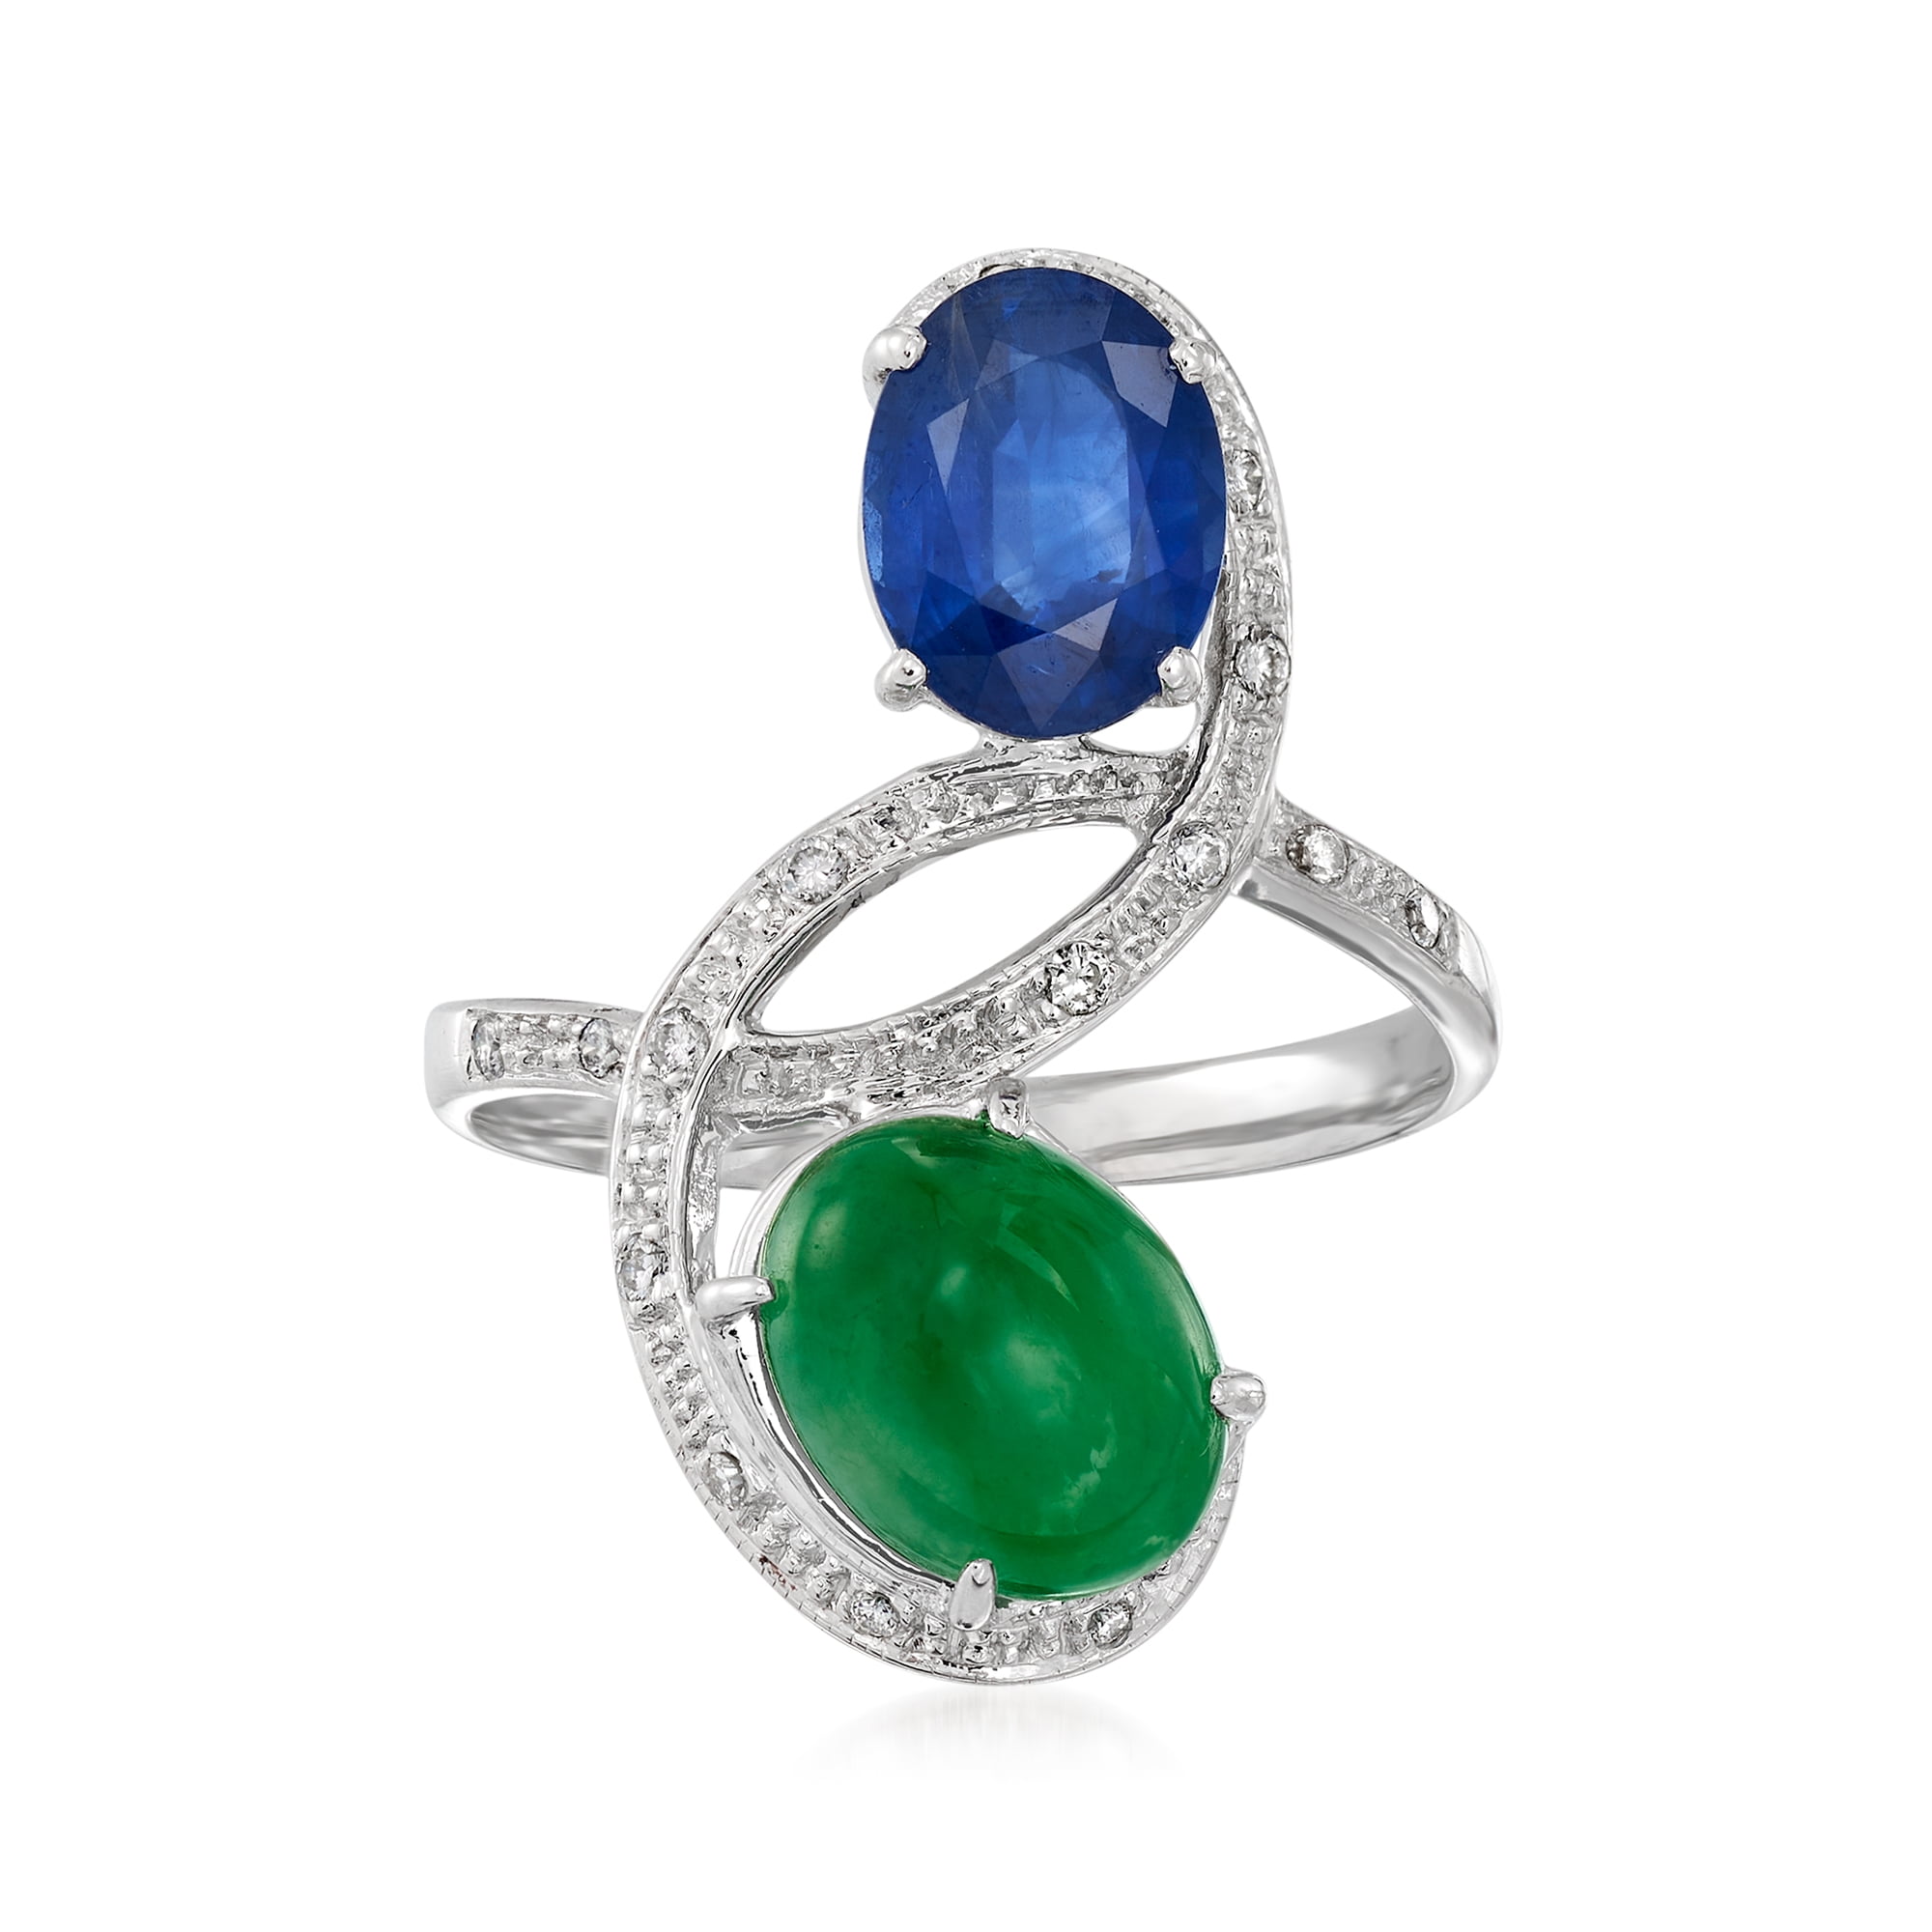 Ross-Simons C. 1990 Vintage Jade, 1.53 Carat Sapphire and .12 ct. t.w. Diamond Bypass Ring in 18kt White Gold